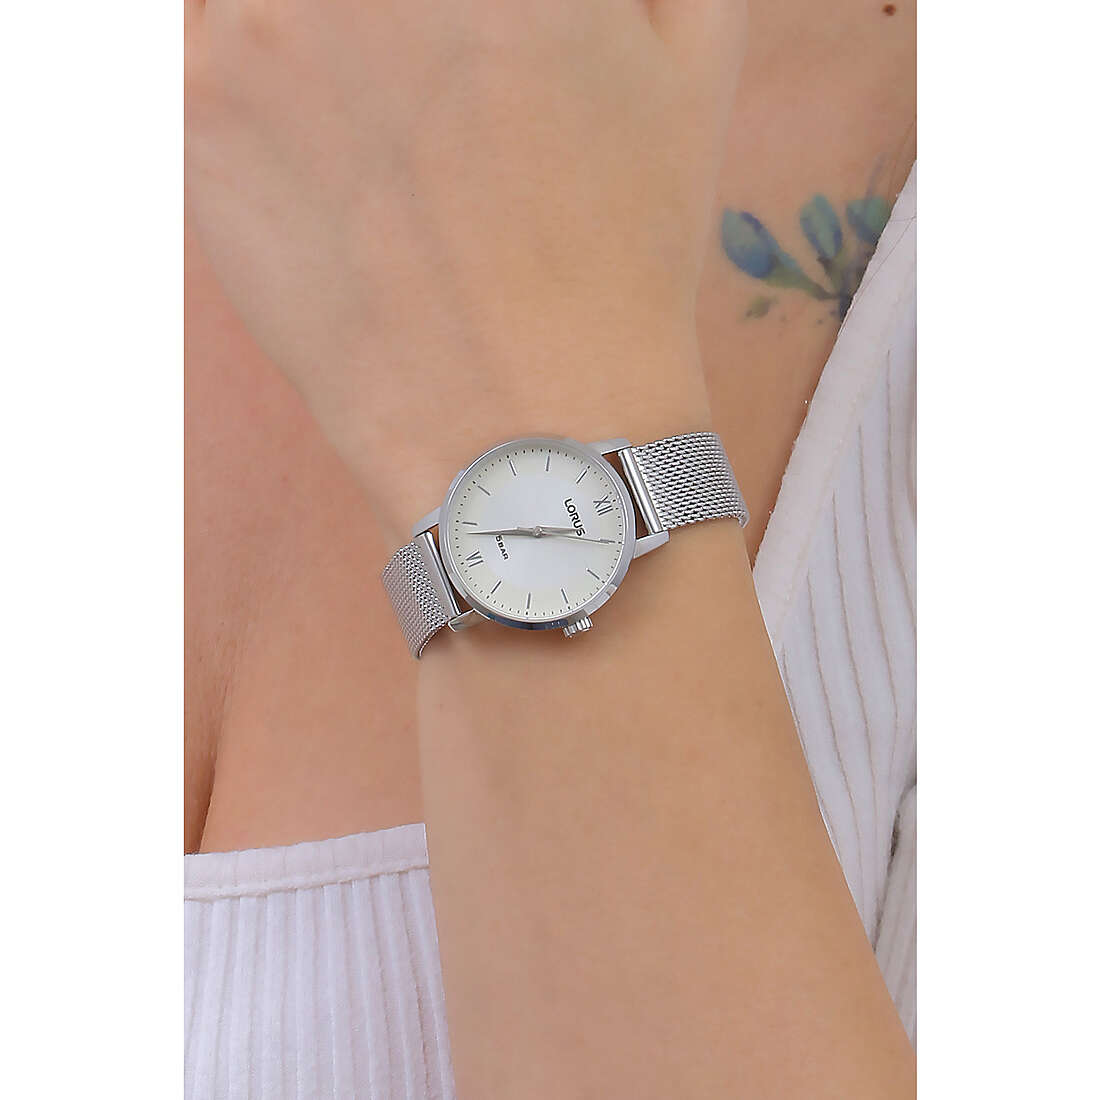 Lorus only time Classic woman RG281TX9 wearing